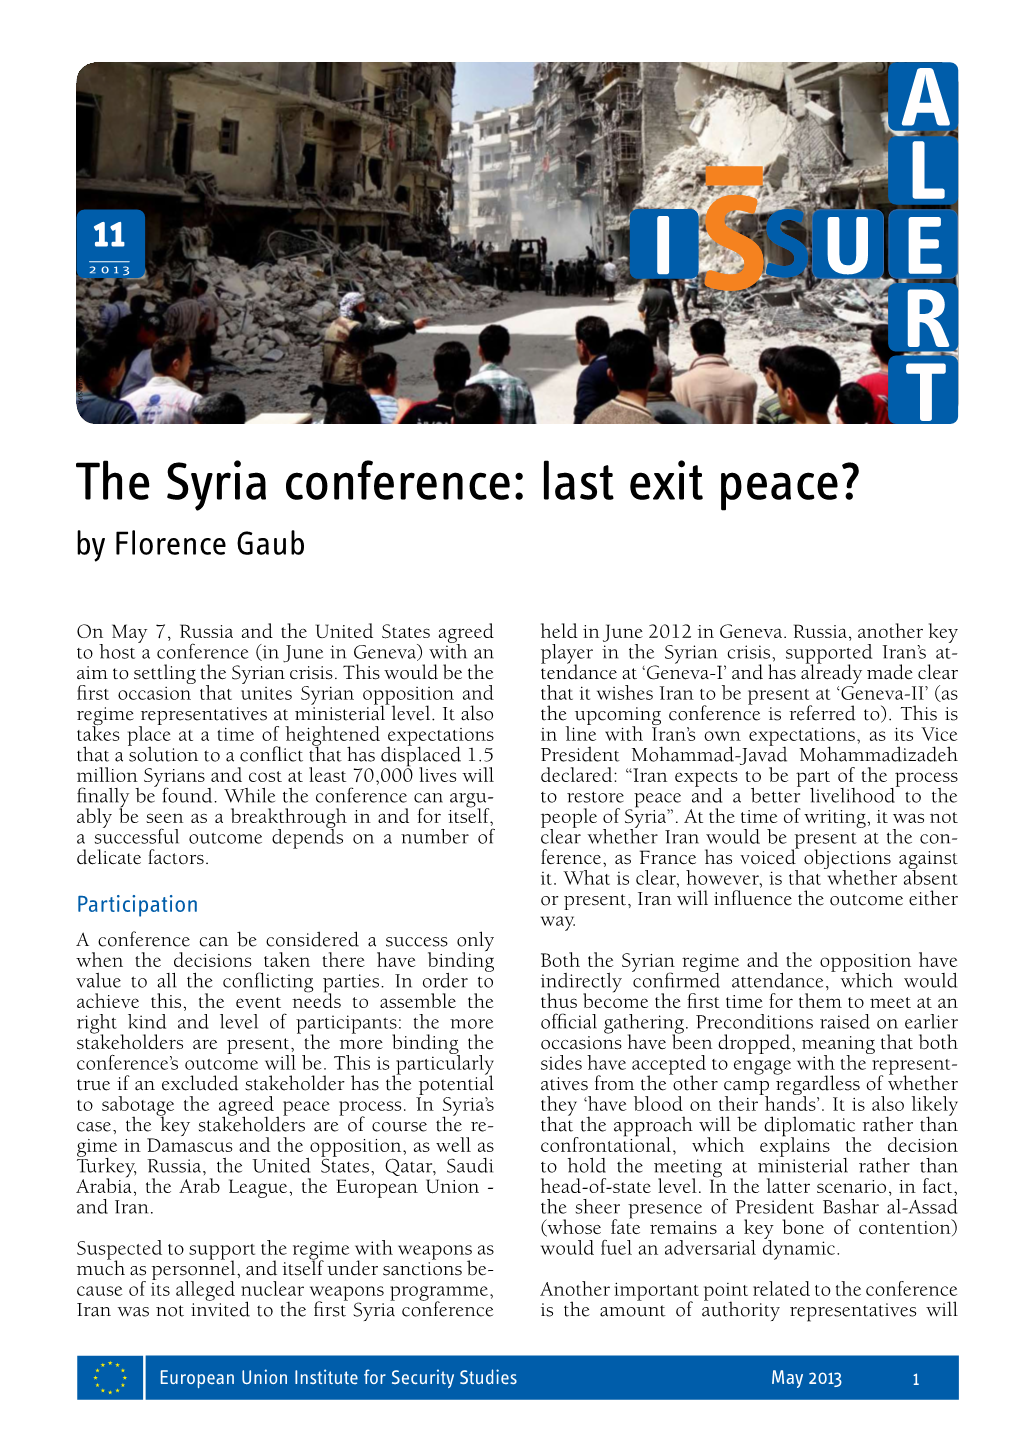 The Syria Conference: Last Exit Peace? by Florence Gaub